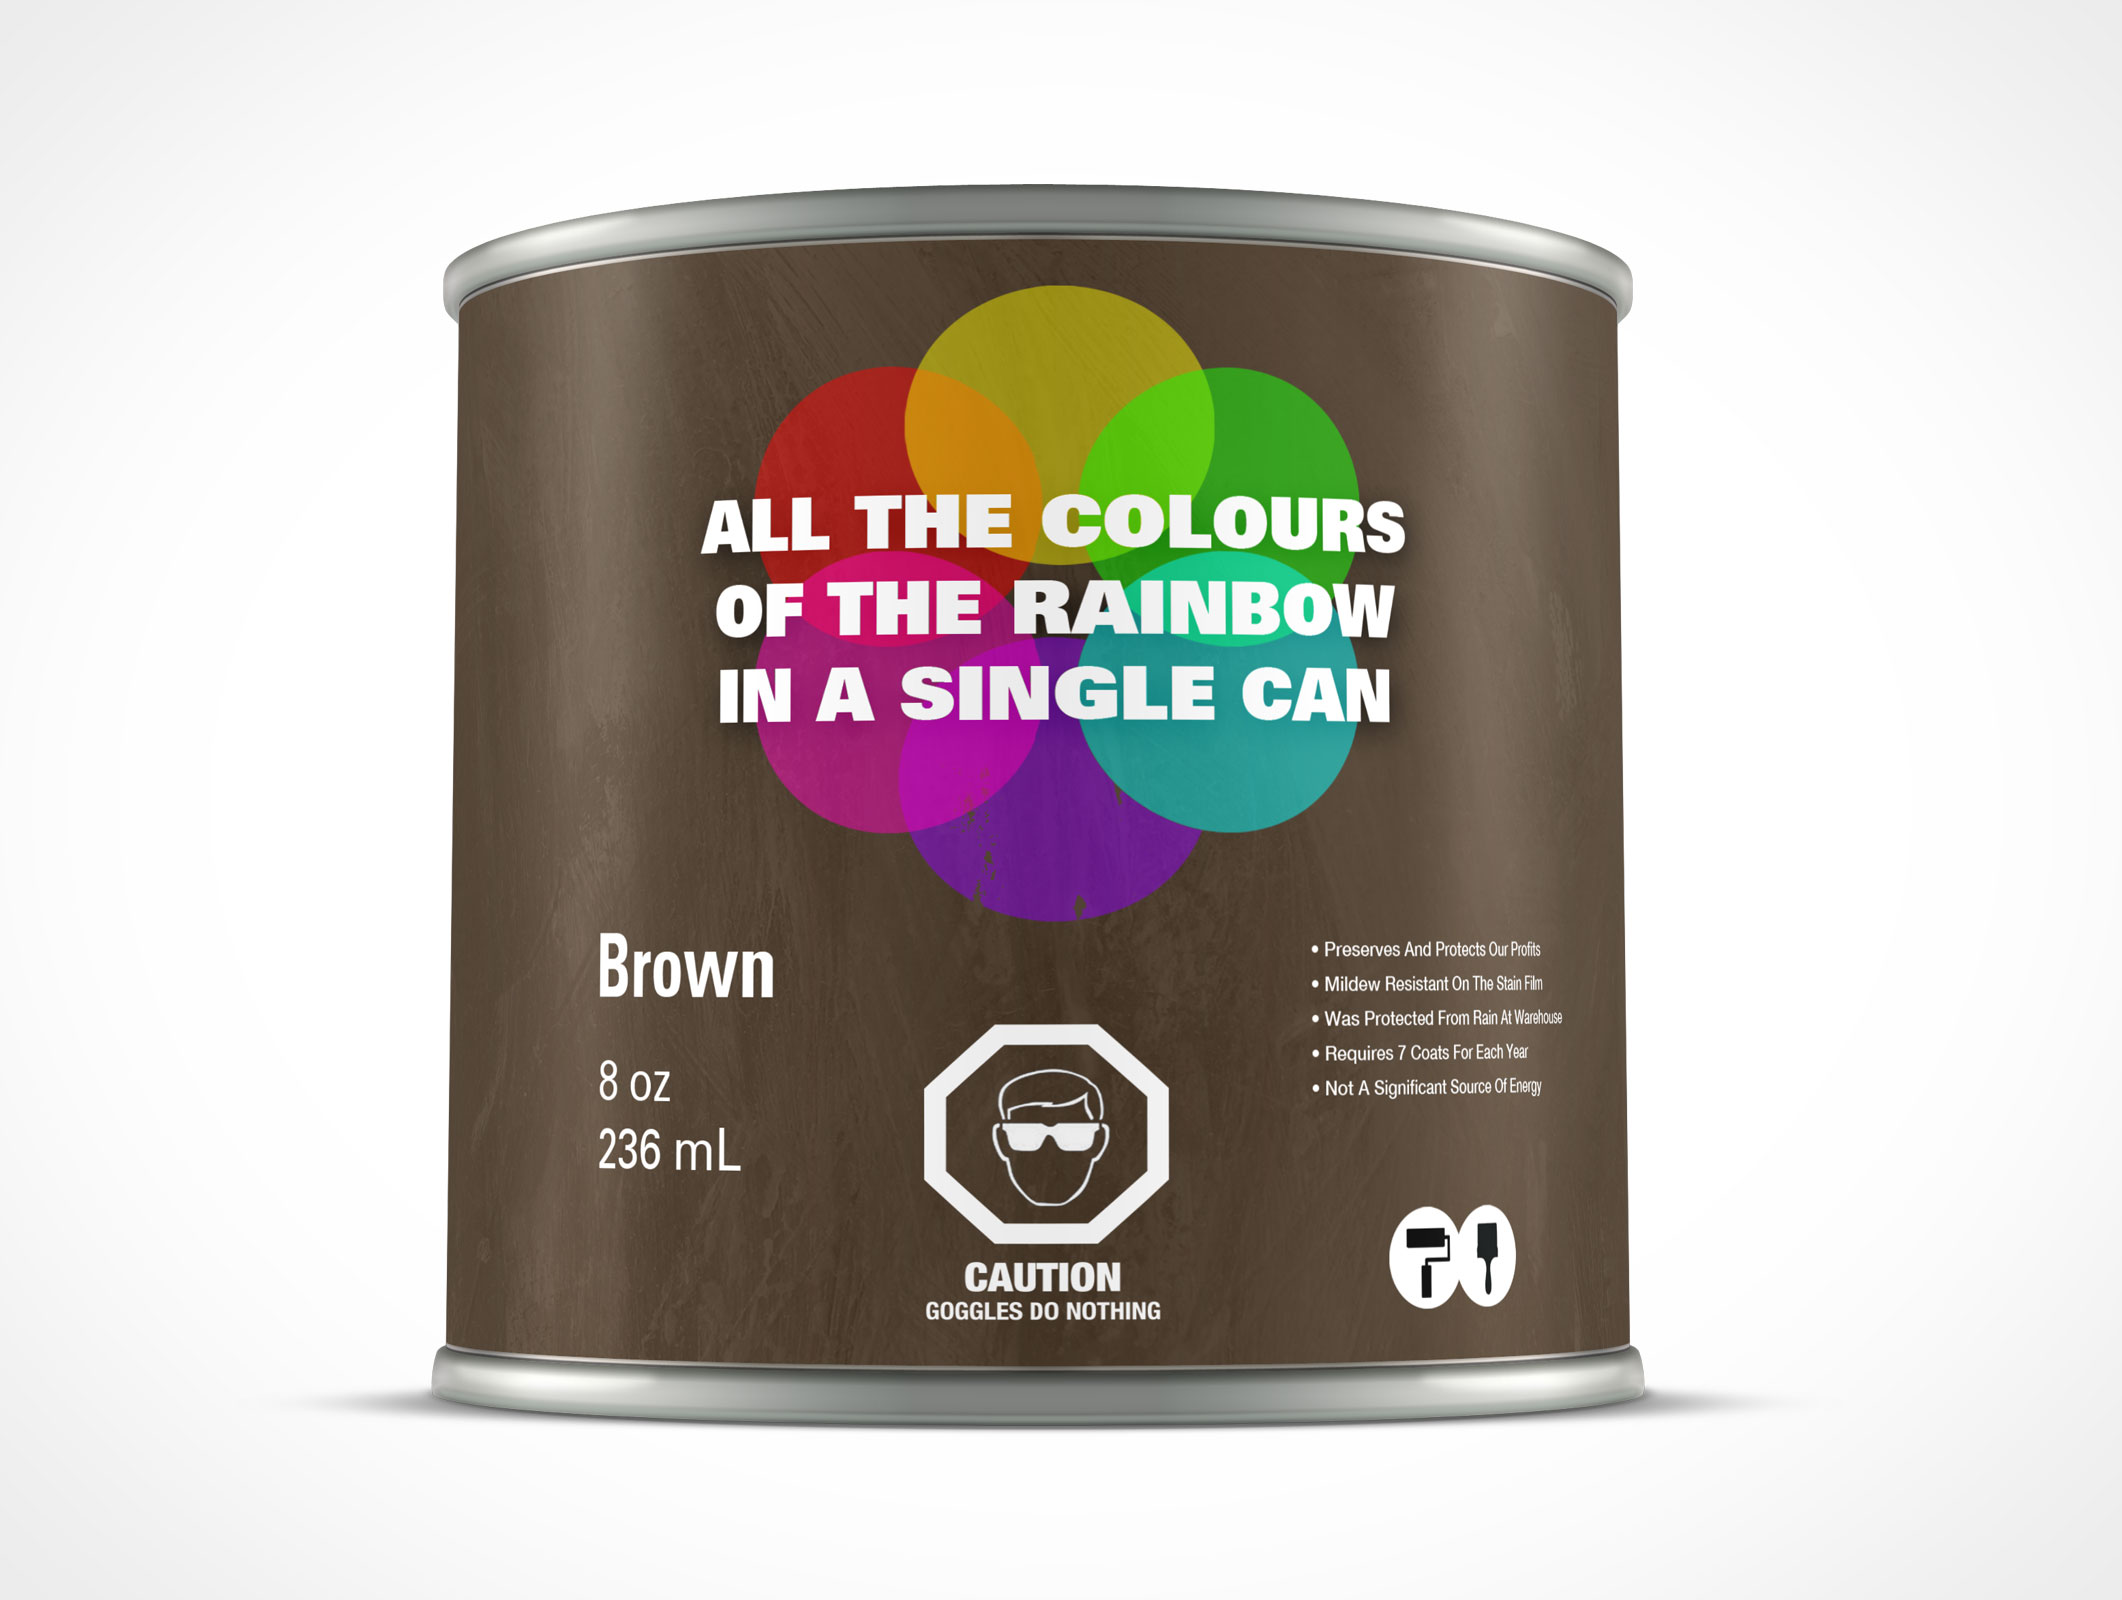 PSD Standing 236mL Paint Can Mockup